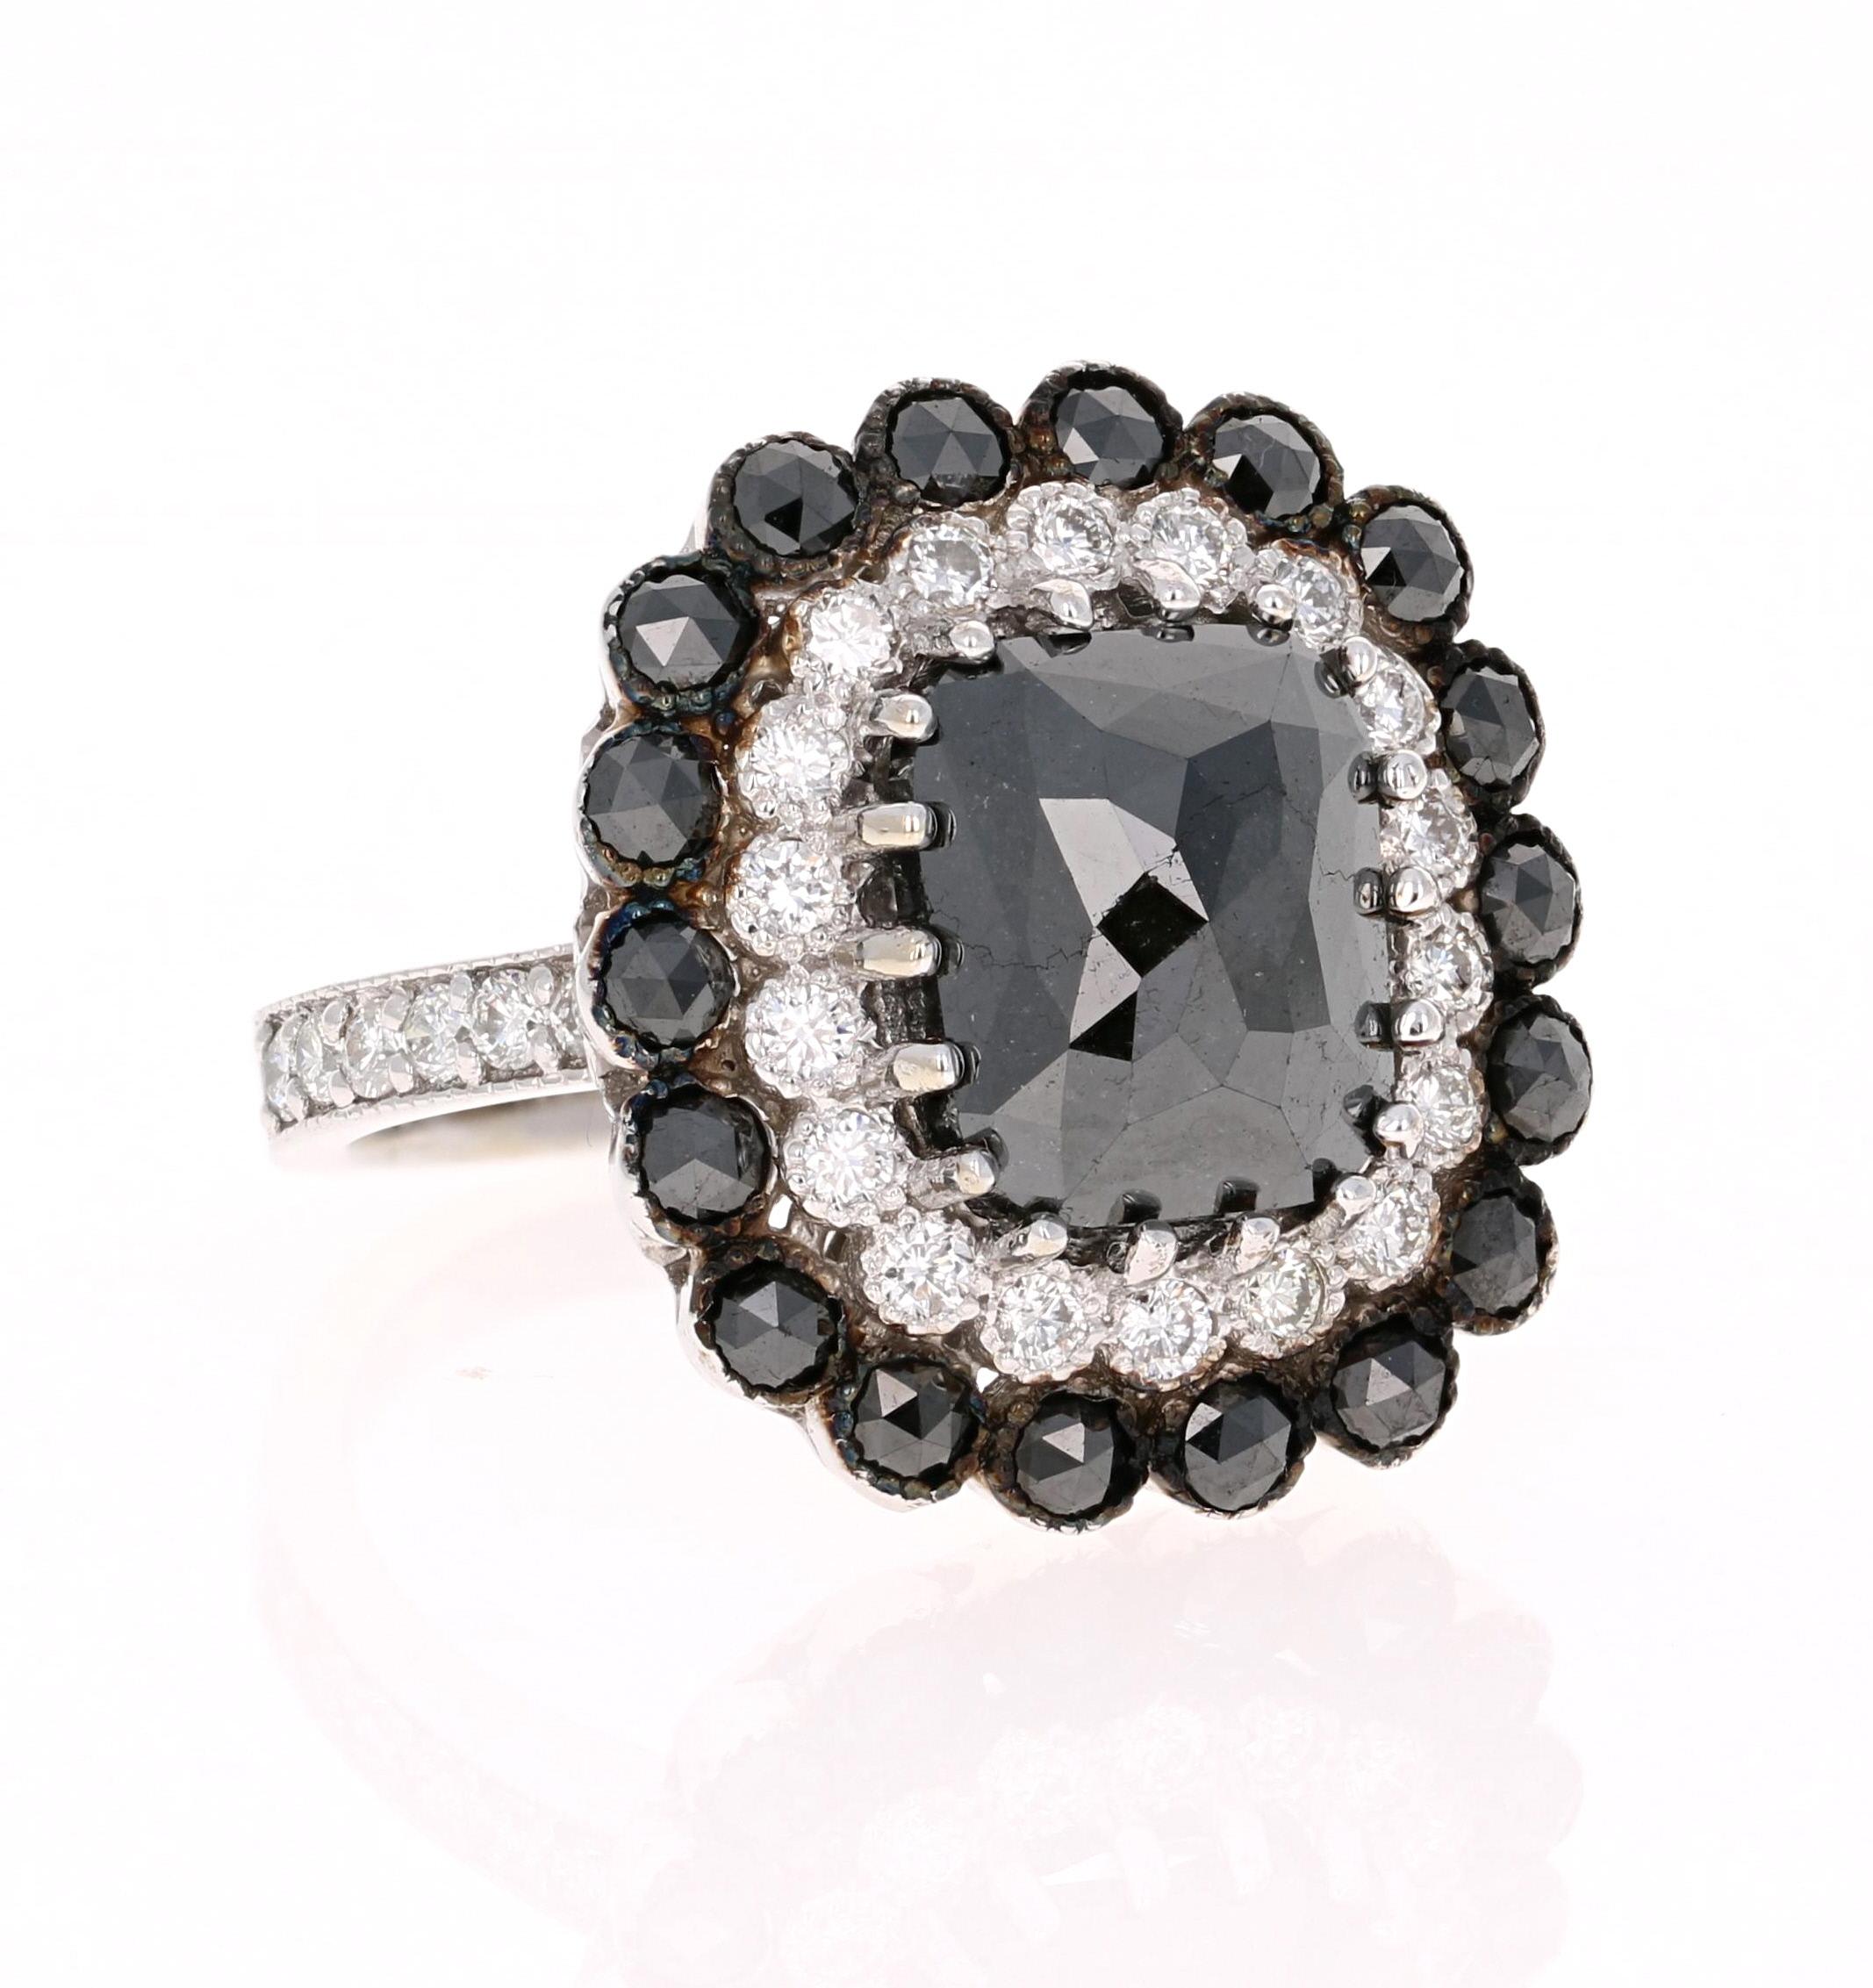 BOLD AND BEAUTIFUL!! 
6.65 Carat Black Diamond White Gold Bridal or Engagement Ring  

A 4.79 Carat Rectangular Cushion Cut Black Diamond sits in the center and is surrounded by both Black and White Round Cut Diamonds. The carat weight of the black